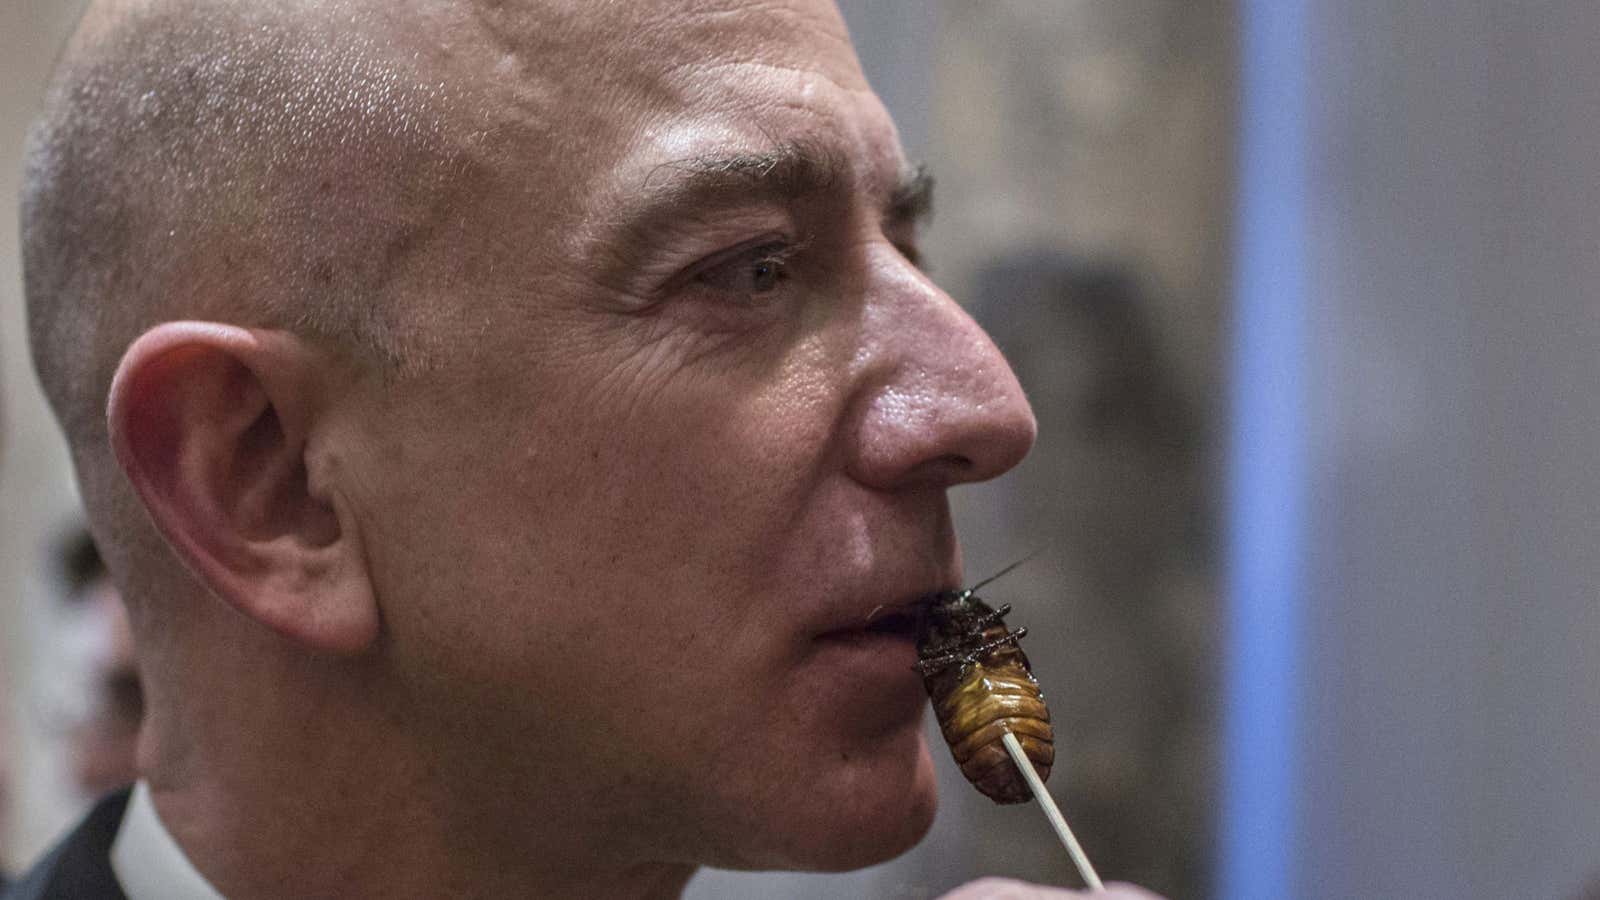 Jeff Bezos and his approach to competition.